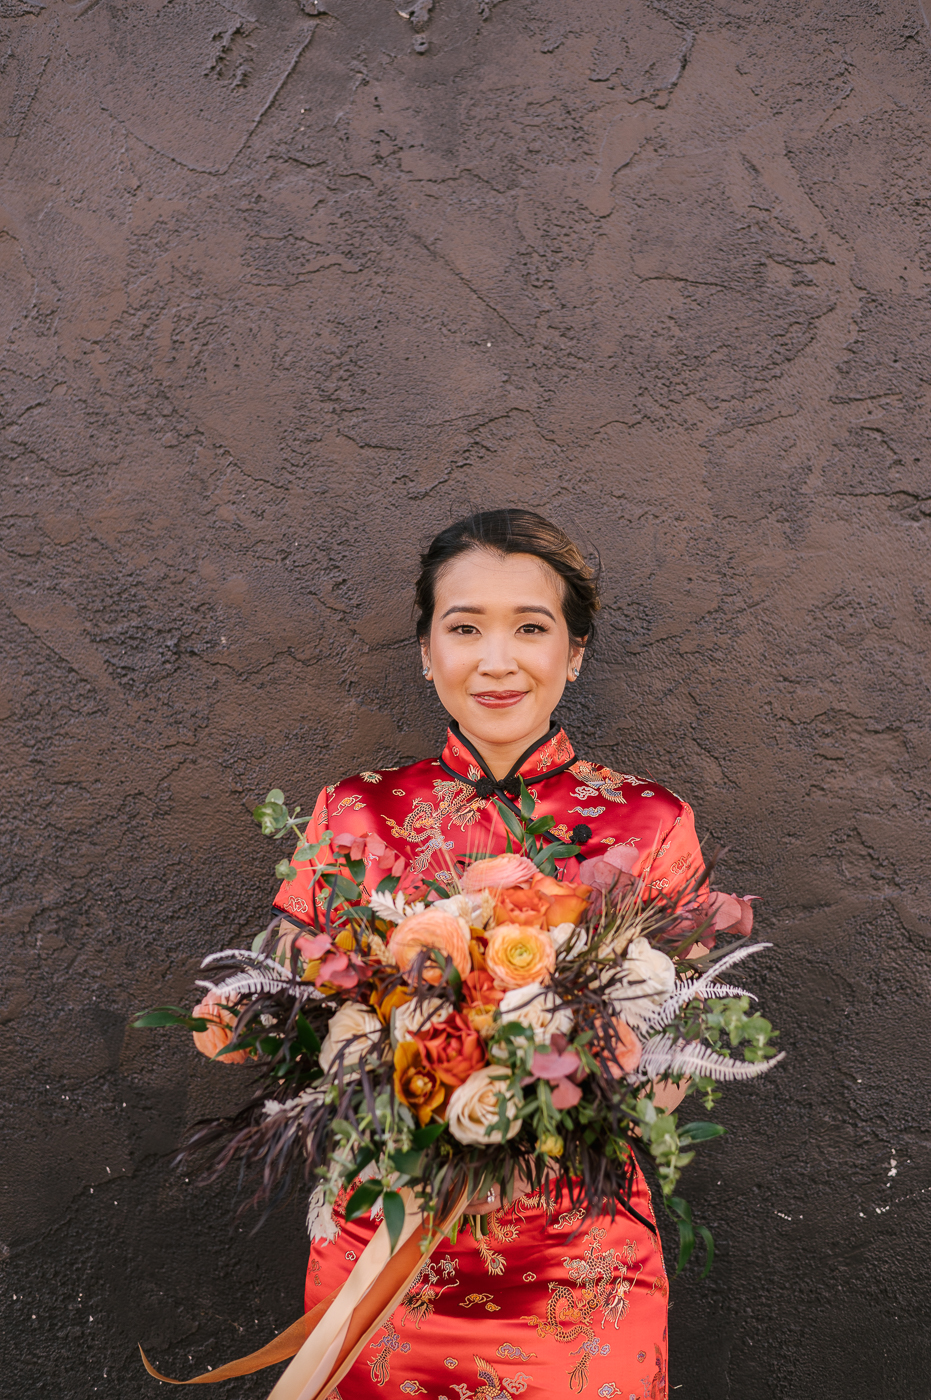 Two Bridal Outfits are Better than One! The beautiful bride in her traditional red cheongsam wedding dress holding her bouquet